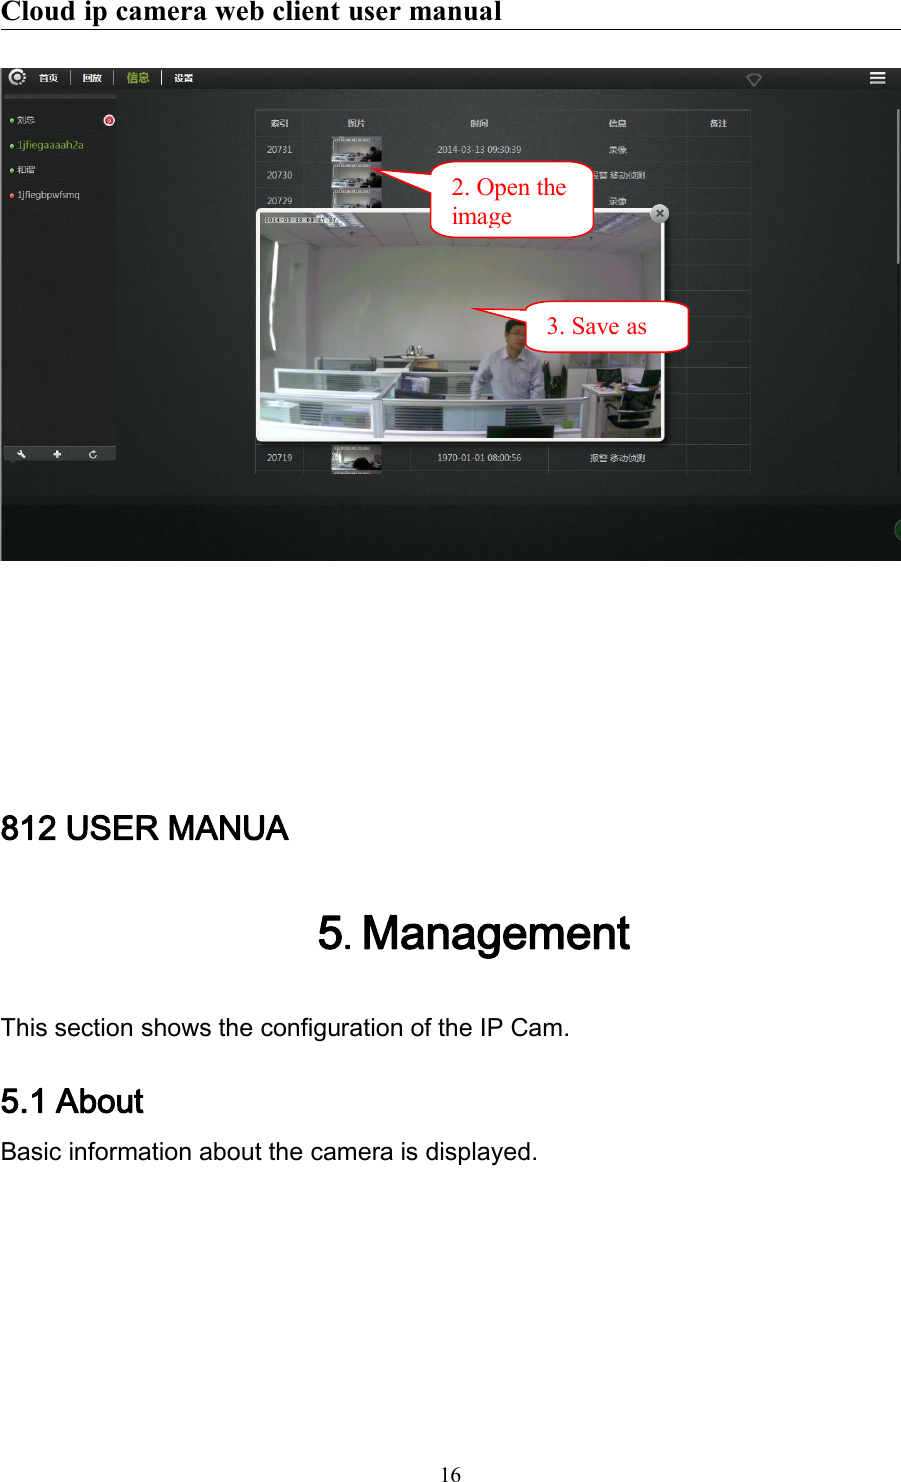 Cloud ip camera web client user manual16812 USER MANUA5.ManagementThis section shows the configuration of the IP Cam.5.1 AboutBasic information about the camera is displayed.2. Open theimage3. Save as